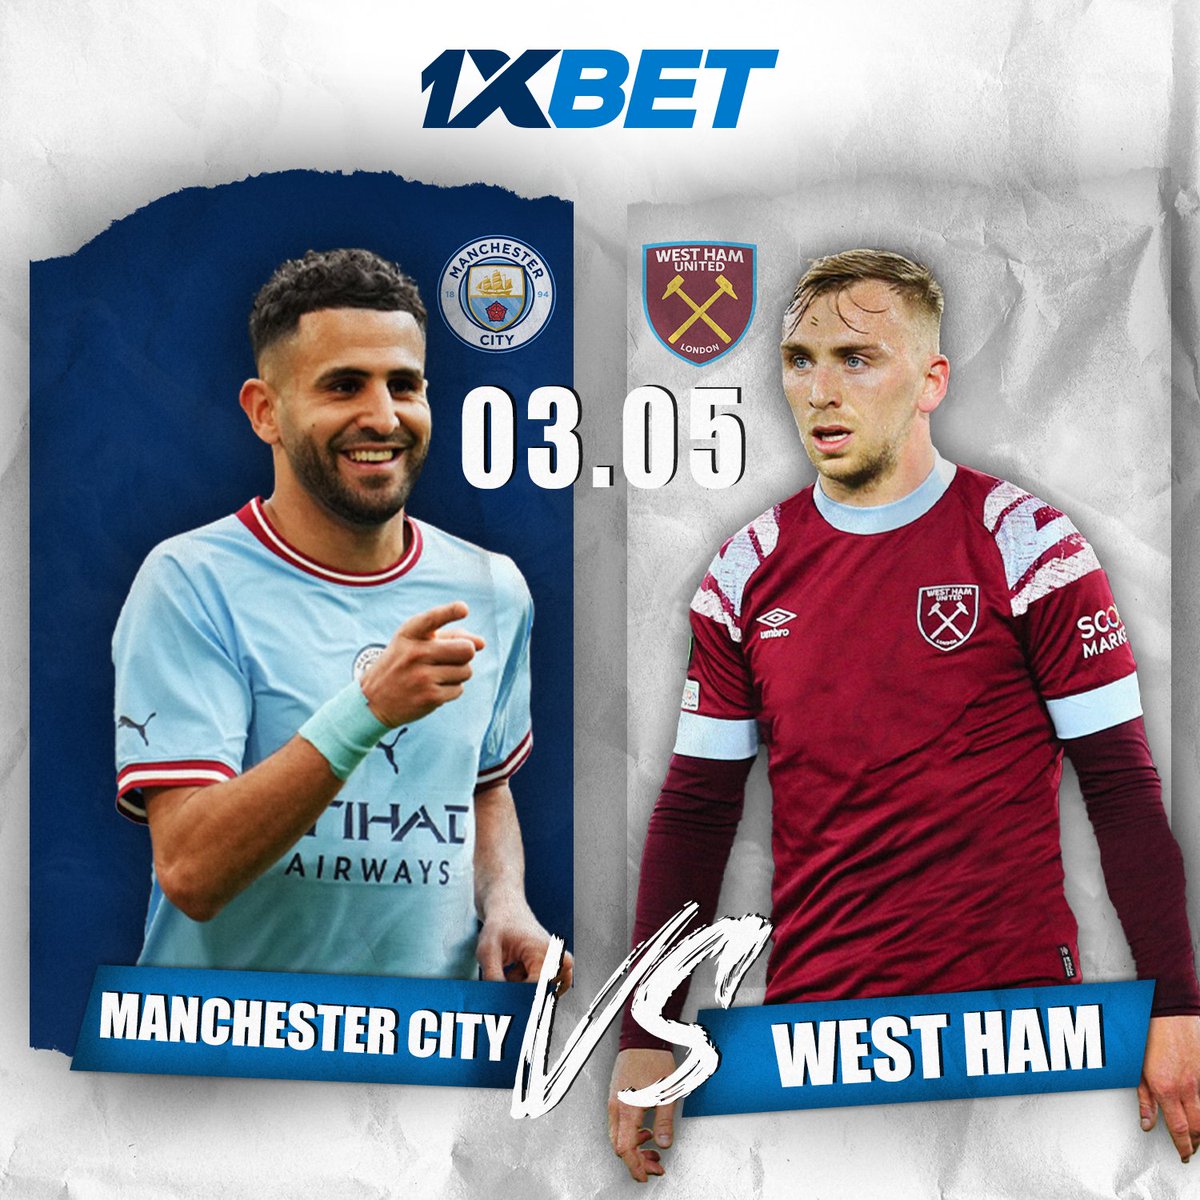 A big match today will mancity grab those 3 points today? Gamblers get 30% bomus at 1XBET when you sign up via clcr.me/99vmHQ.
Promocode:MAXON10

Sanaipei Tande
Kanini kega
#tirriestuesday 
Moses kuria
#magicalkenyaopen